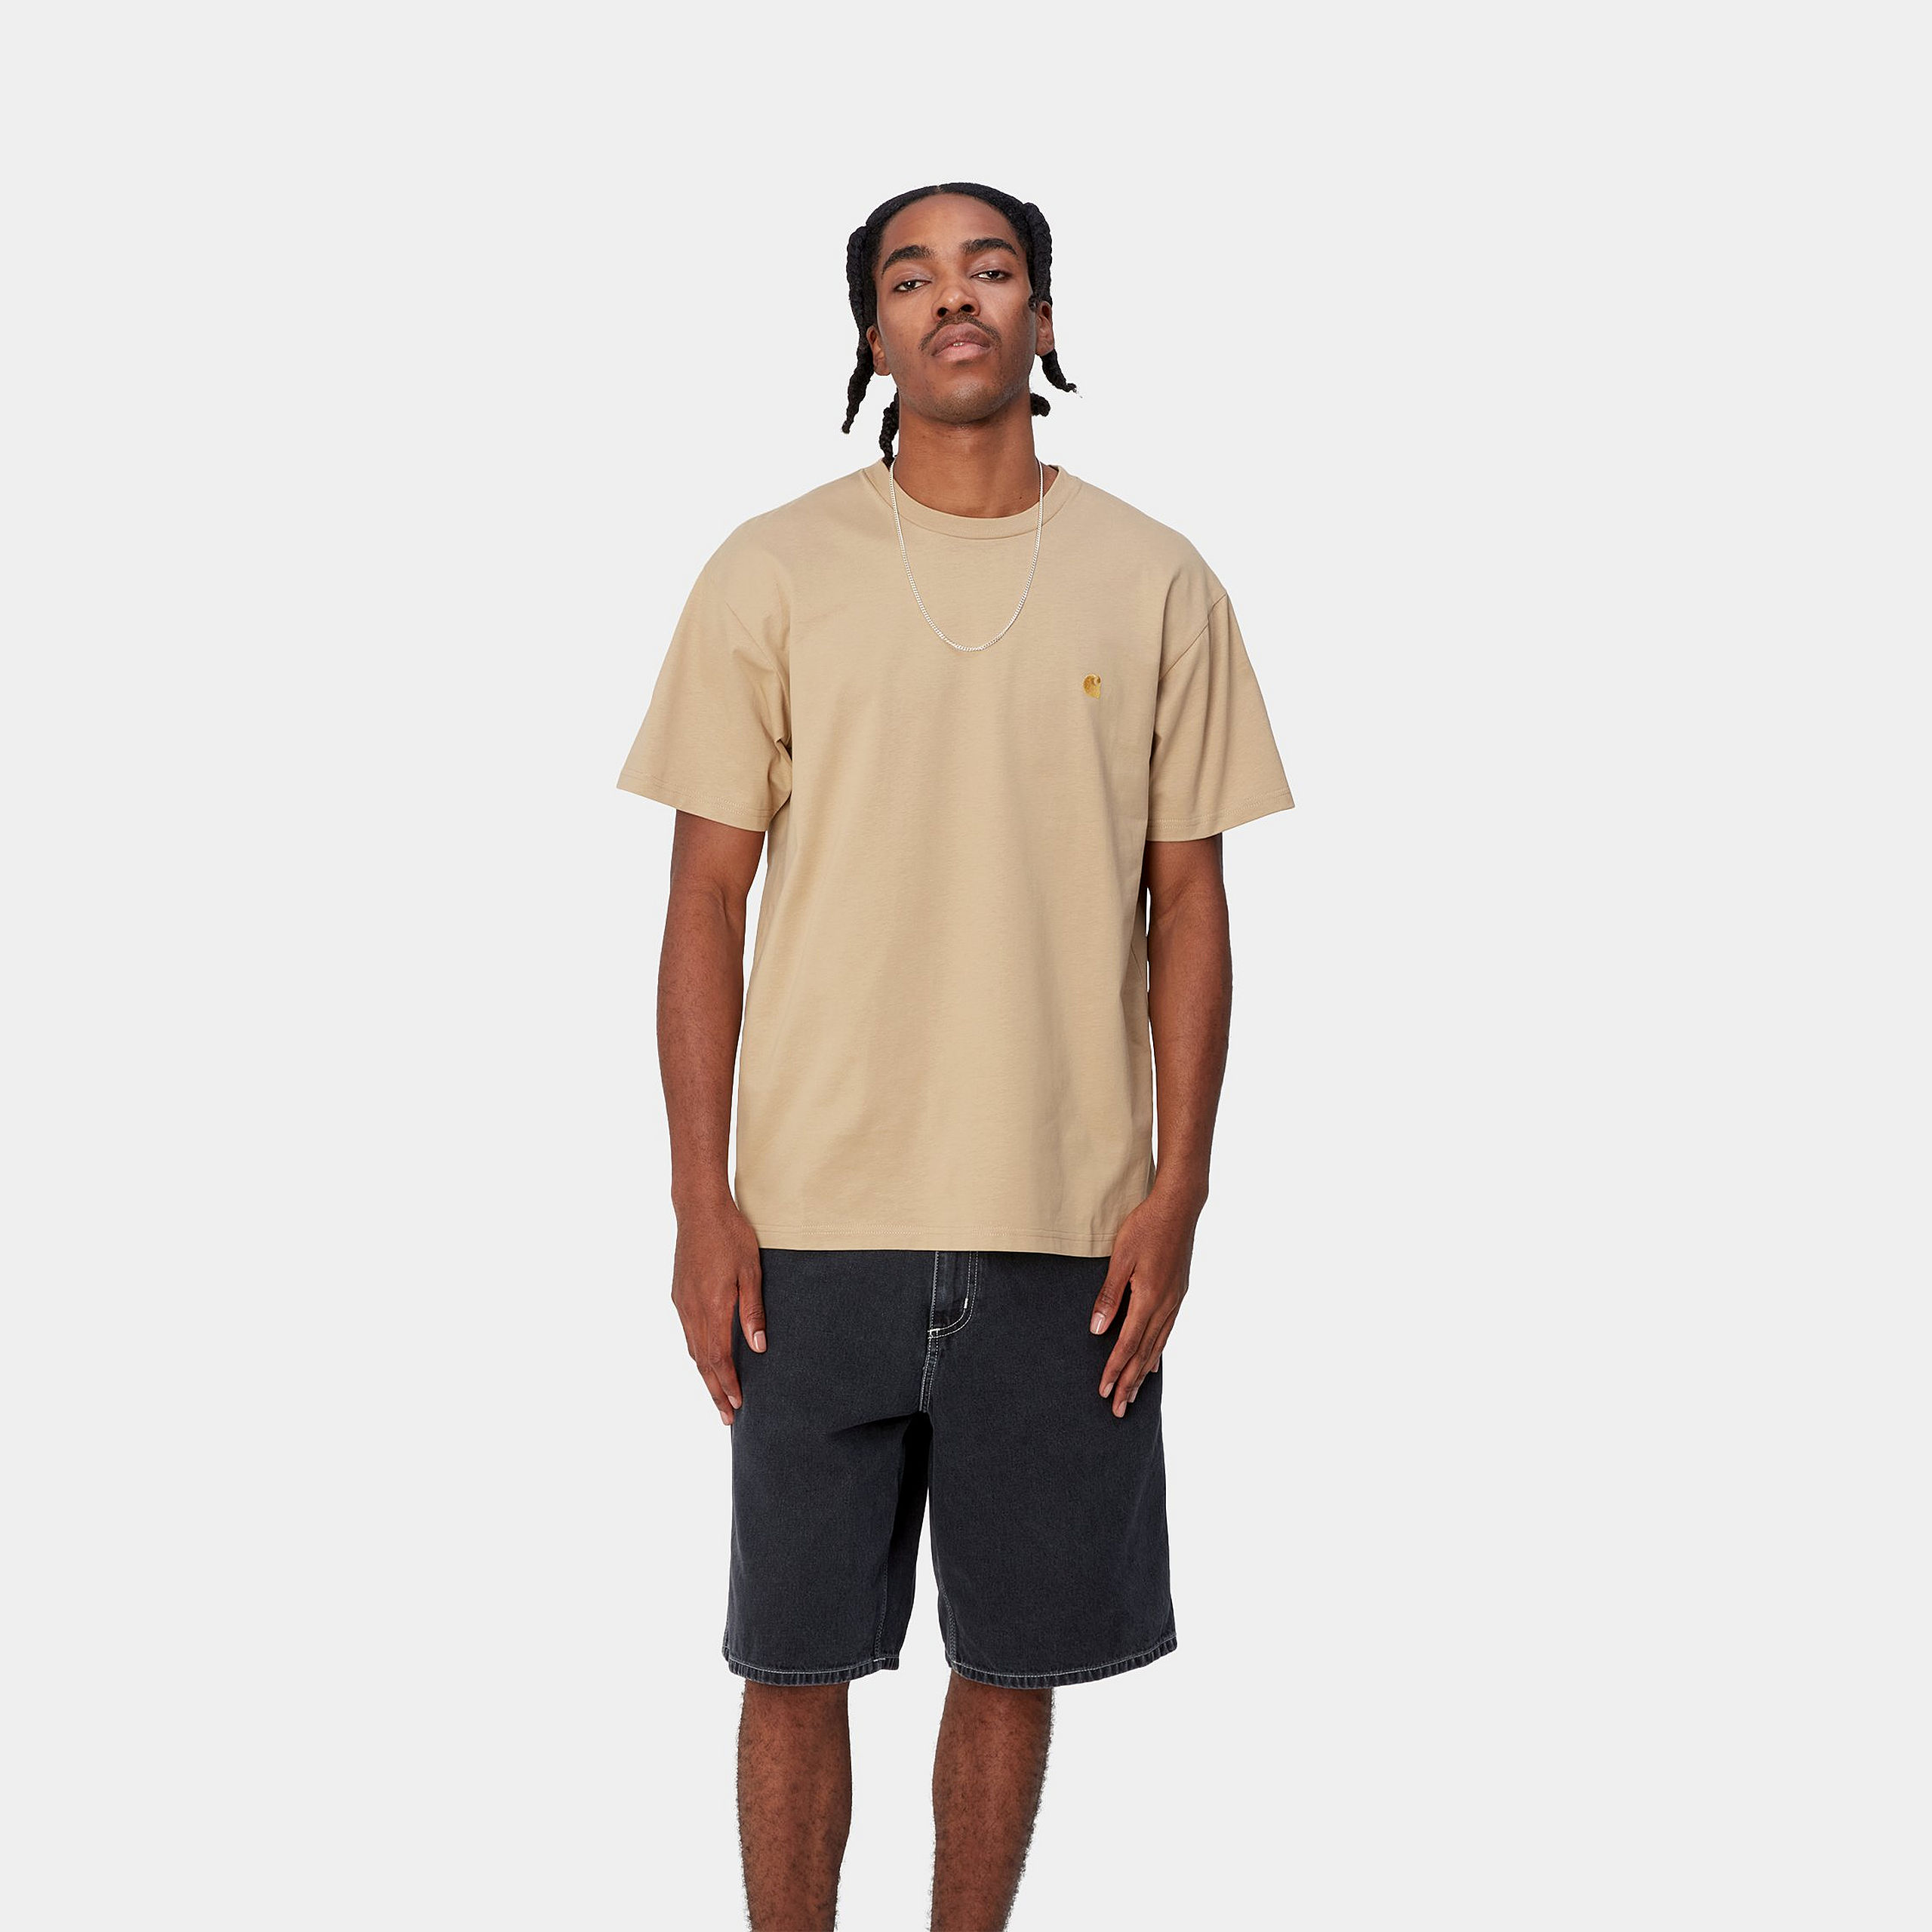 Camiseta Carhartt Wip S/S Chase Sable Gold